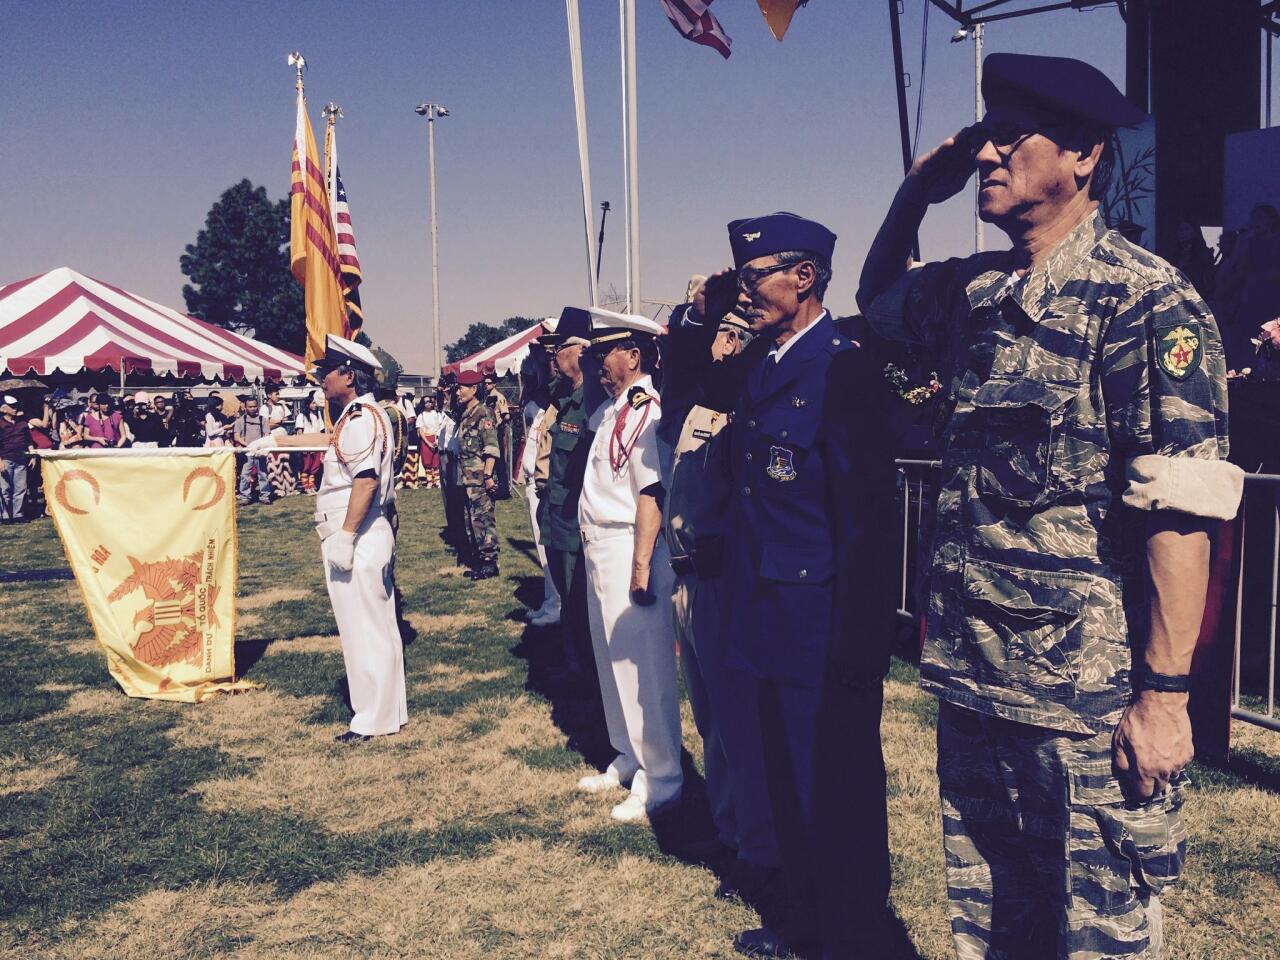 Republic of Vietnam Warriors Association members conduct the flag ceremony at the San Diego Tet Festival 2016.